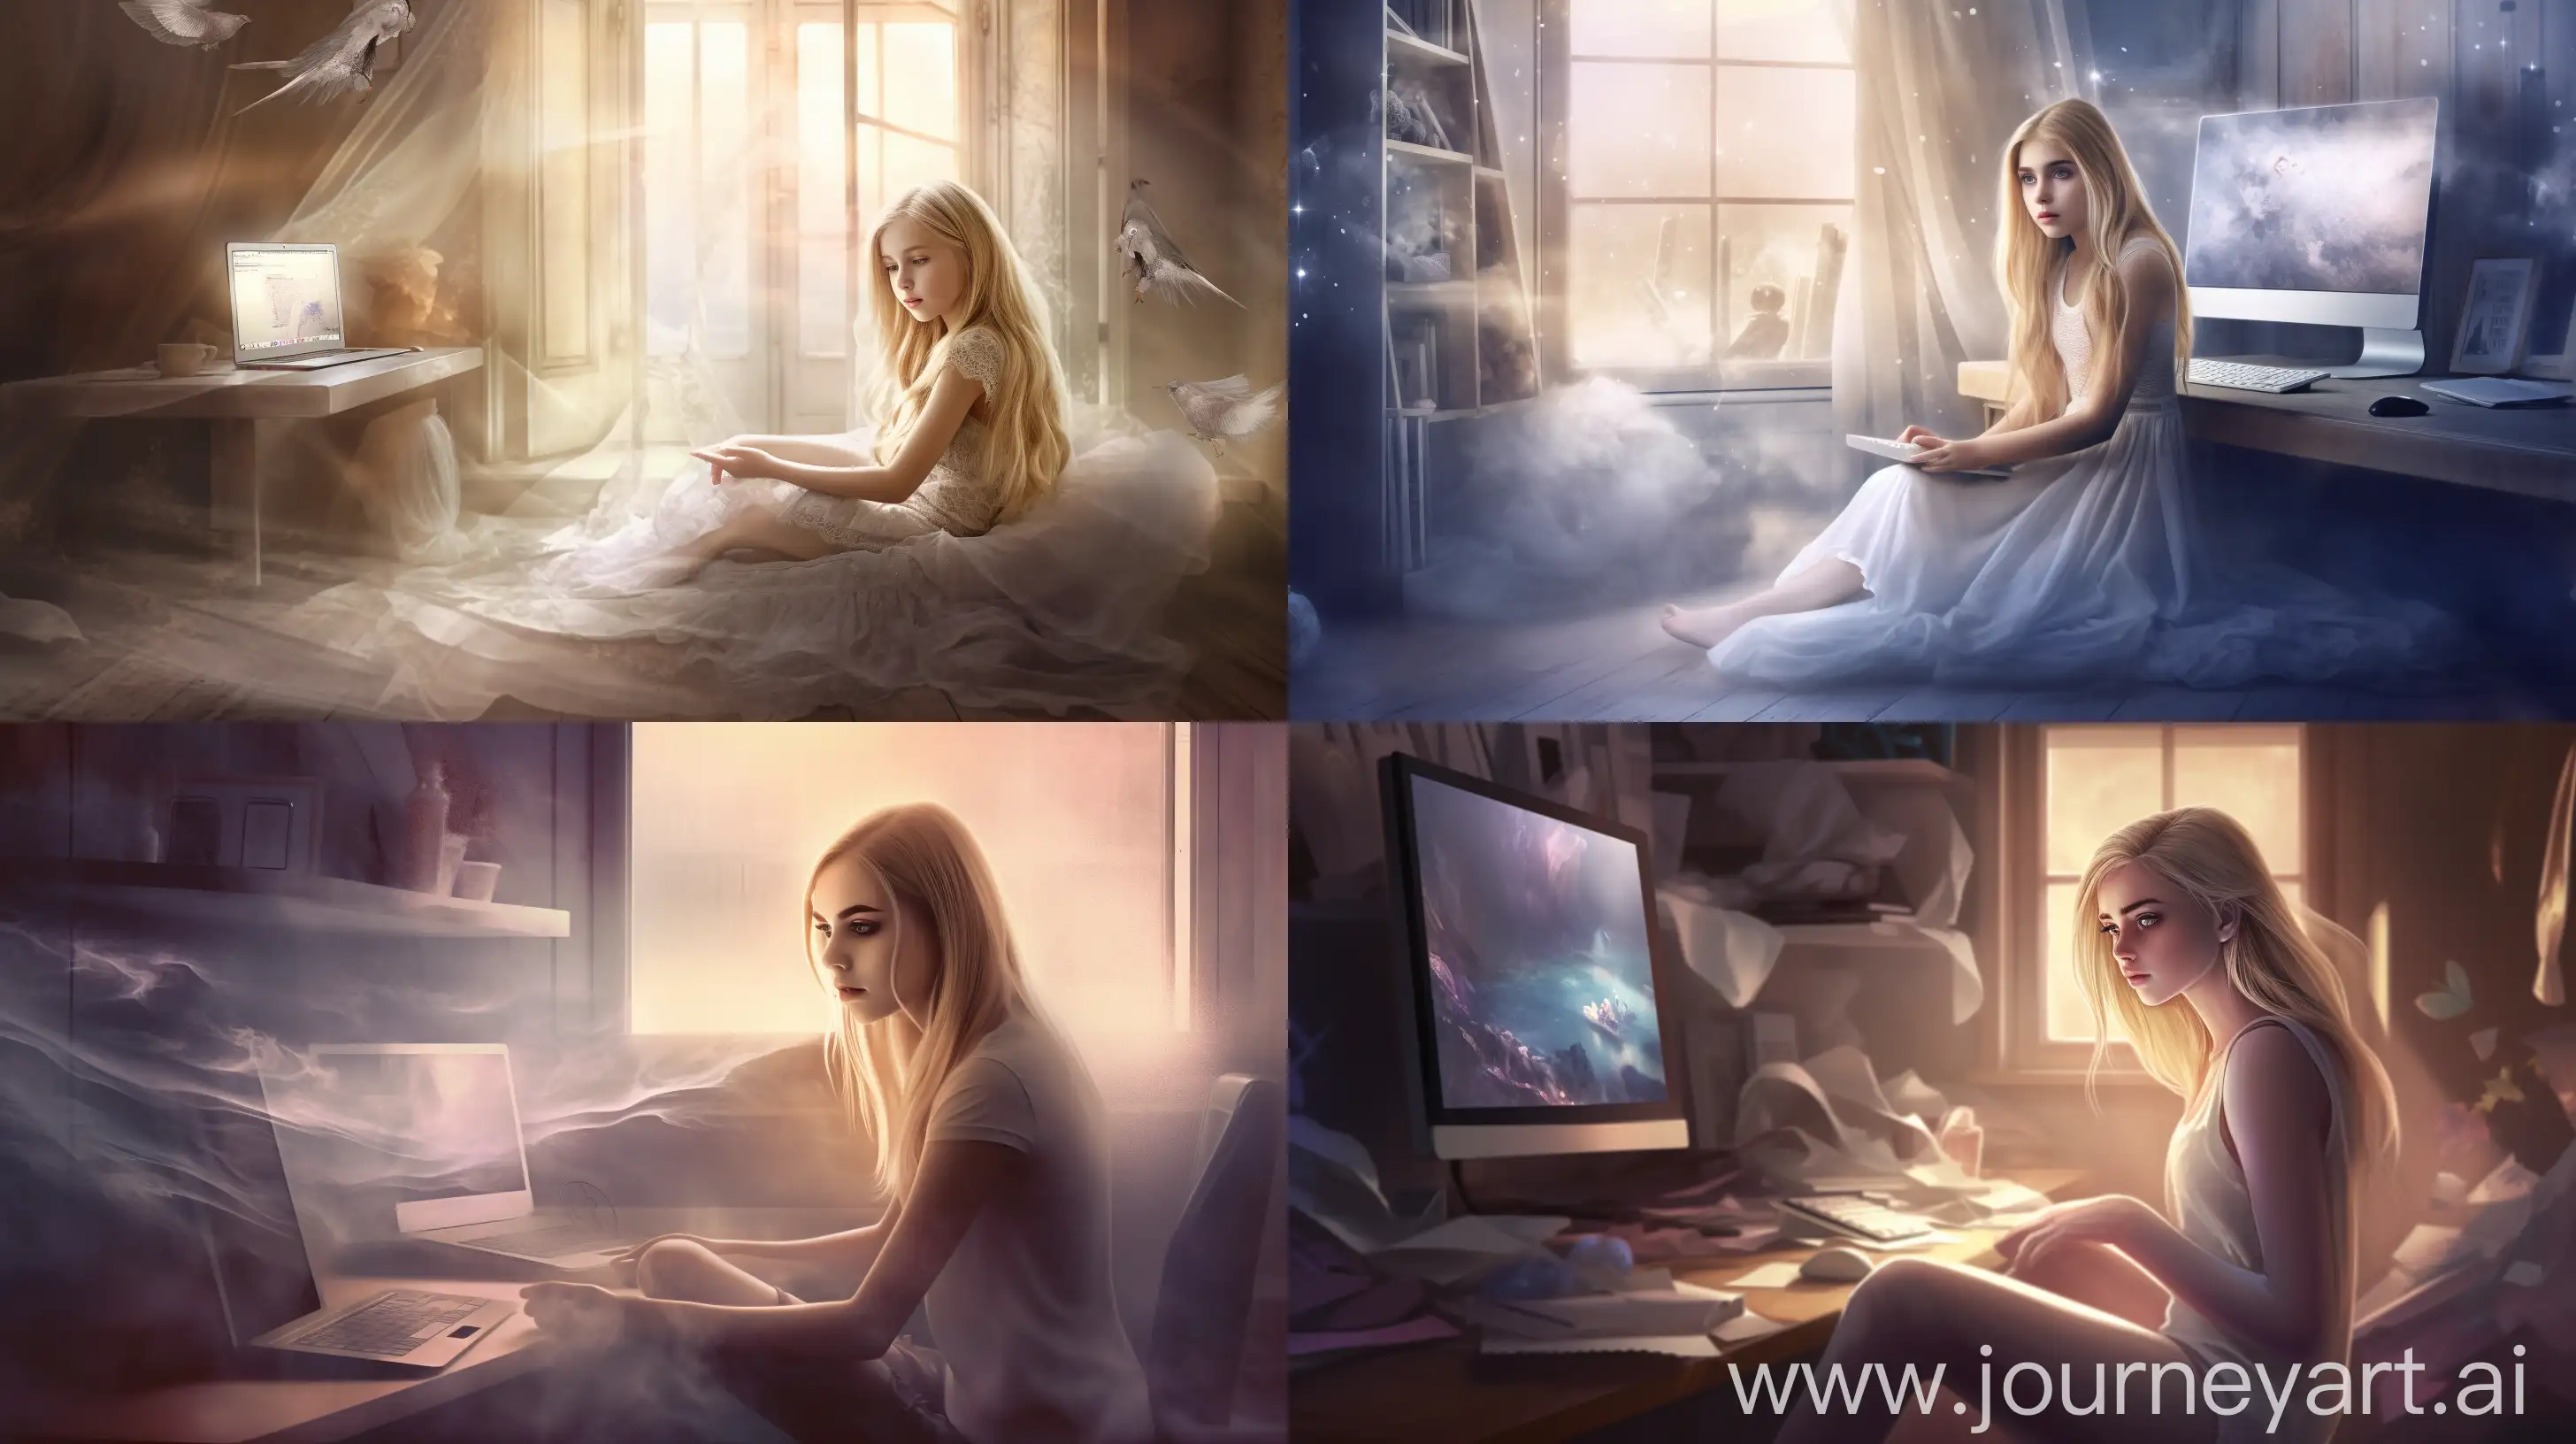 /imagine prompt: In a computer office, a young girl is sitting behind her laptop. The room is aglow with a soft, ethereal light that creates a mystical atmosphere. The girl, dressed in a fashionable top dress, radiates creativity with her straight blonde hair flowing elegantly over her shoulders. The image is rendered with a dreamy quality, blending in subtle fantasy elements that infuse a magical essence into the scene. The office is equipped with advanced computer devices, network tools, and printing equipment, all positioned amidst elegant tables and chairs. The overall mood is enchanting and inspiring, capturing the essence of a young girl deeply engaged in the realms of technology and creativity. --ar 16:9 --v 5 --q 2